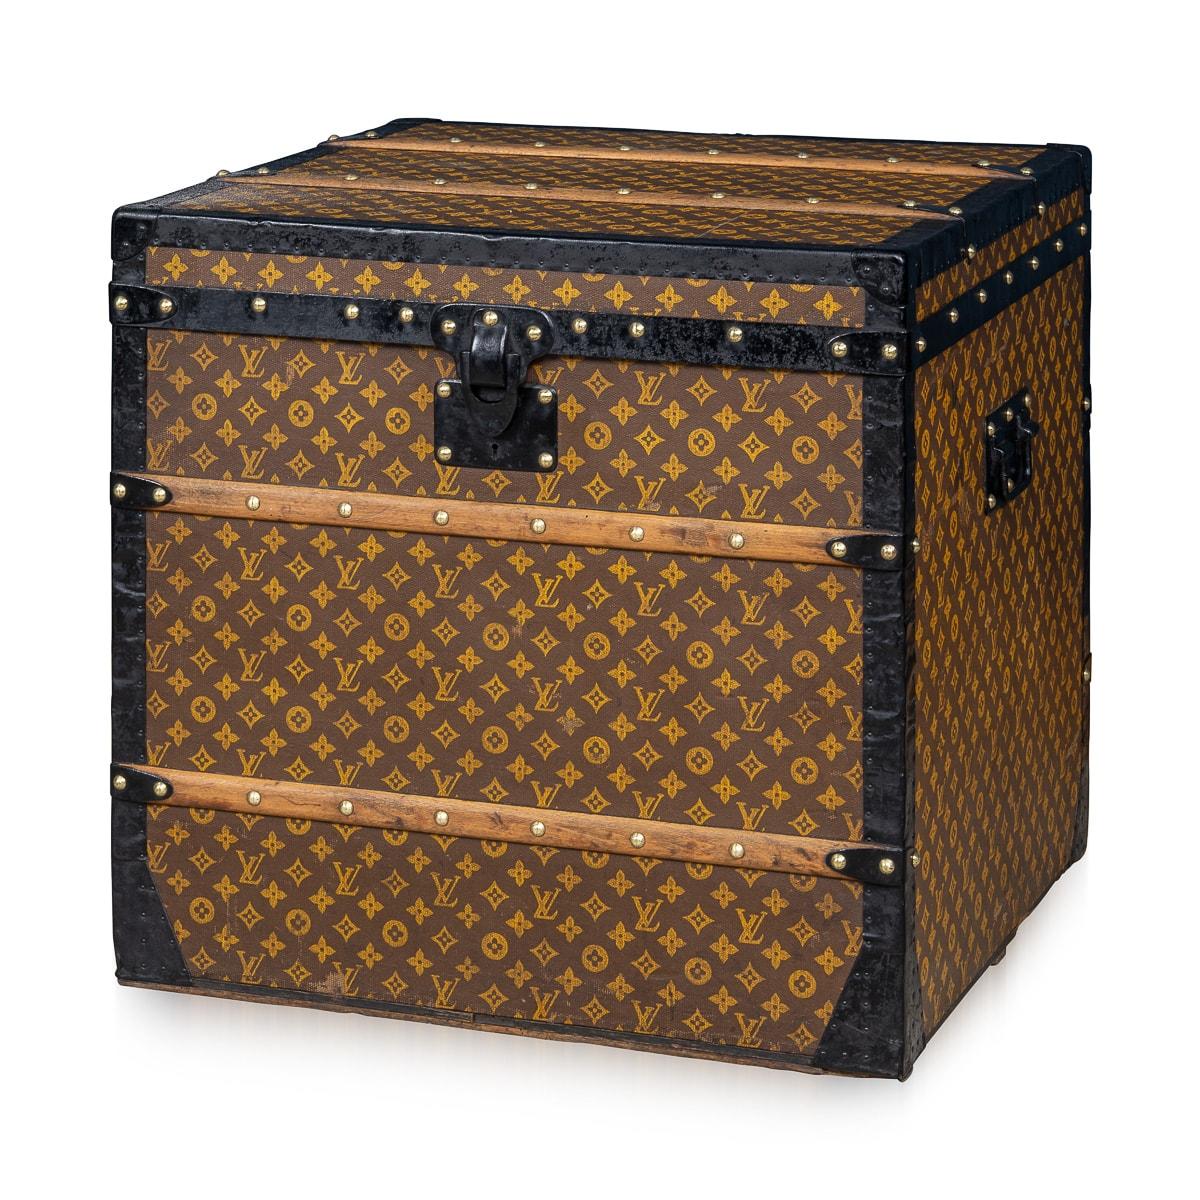 A superb example of an early 20th century Louis Vuitton hat trunk in the world famous monogrammed LV canvas. Complete with all its interior trays, this unusually sized trunk is in very good condition and harks back to times of passenger ships and